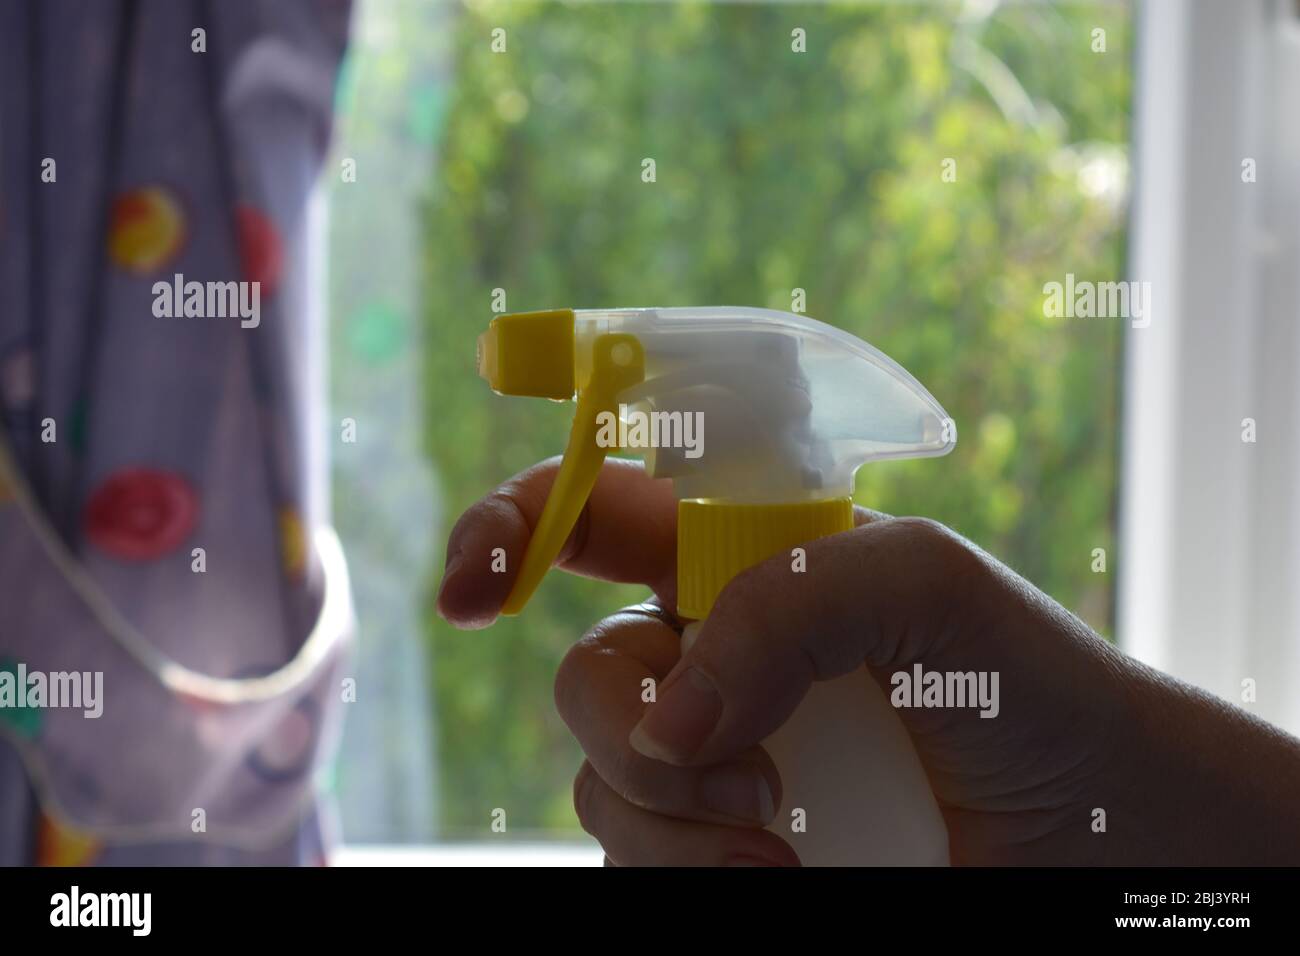 Hand holding spray bottle, spring cleaning Stock Photo